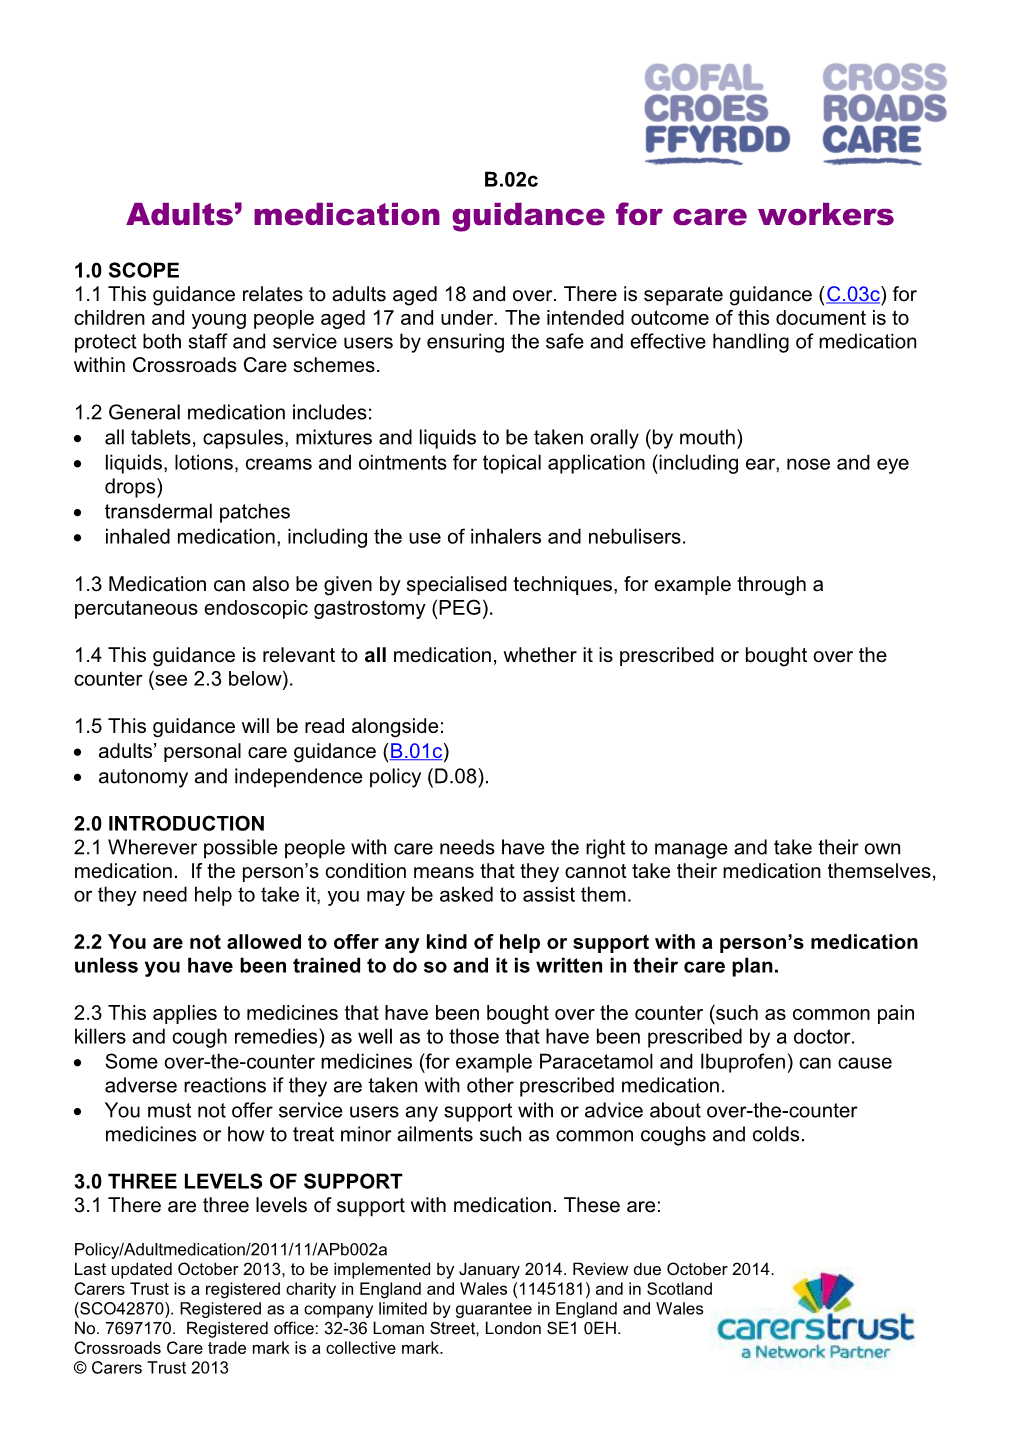 Crossroads Careadults Medication Guidance for Care Workers